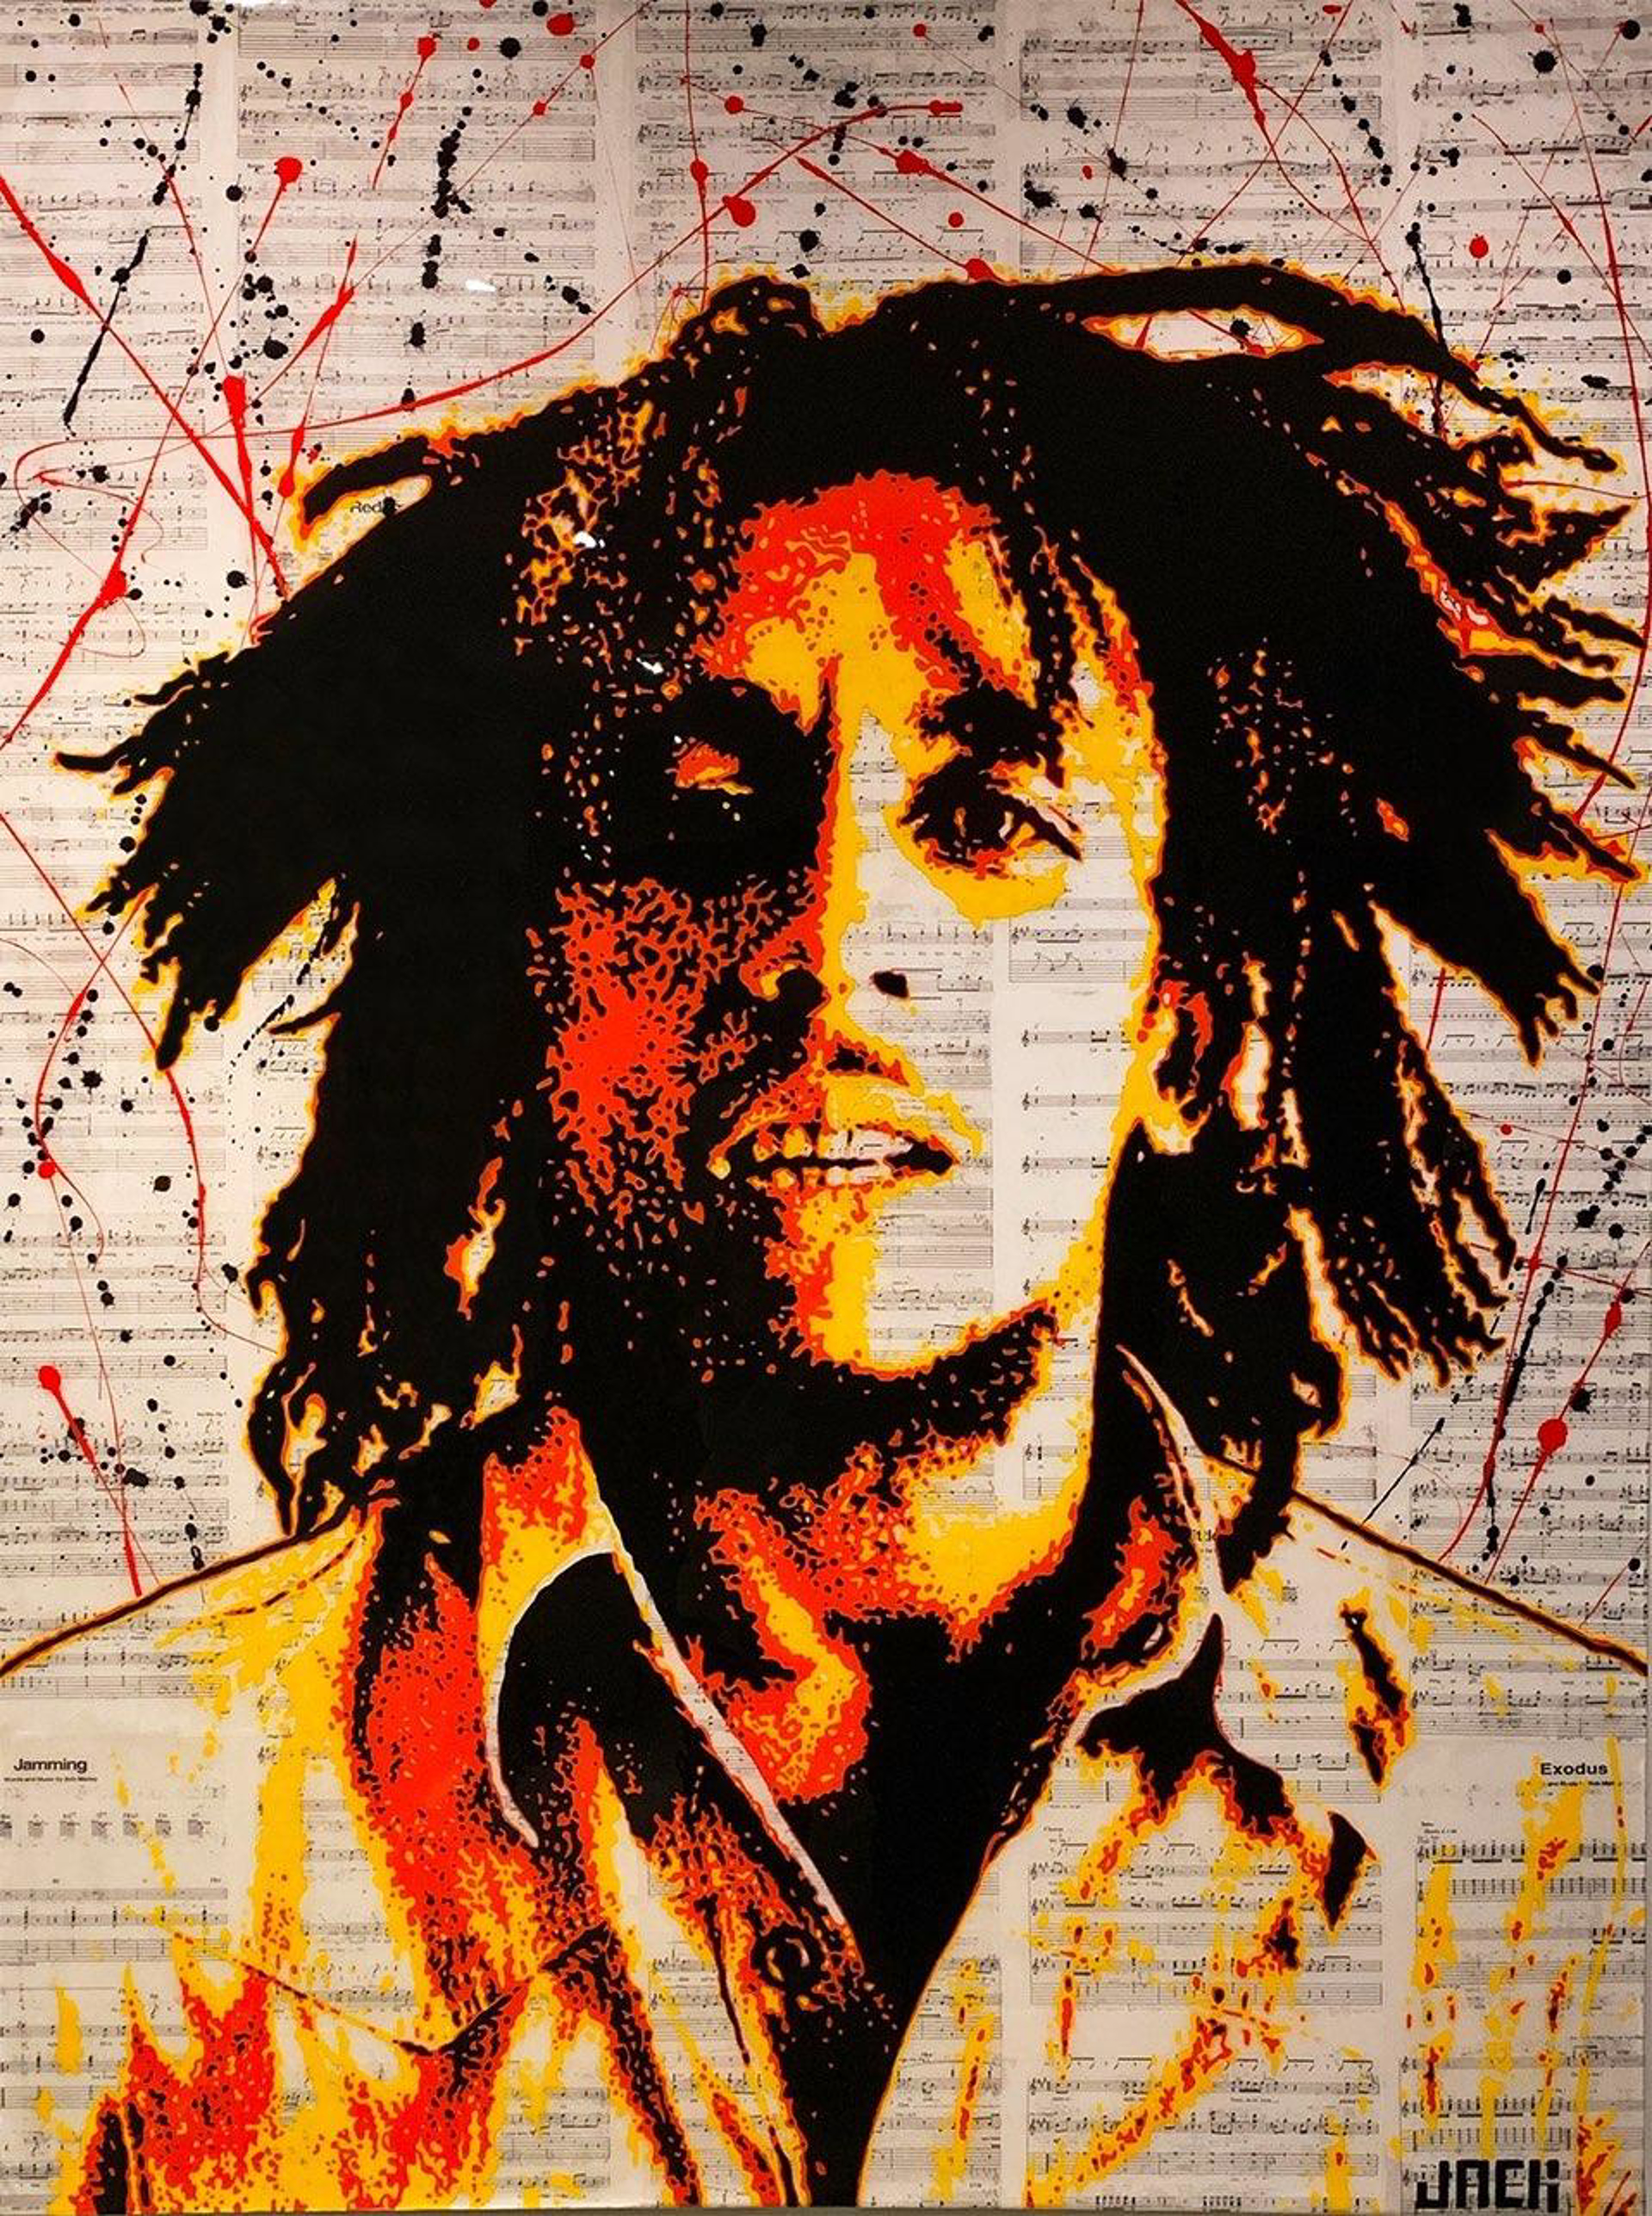 SOLD - Bob Marley - Commission available by Jack Flo